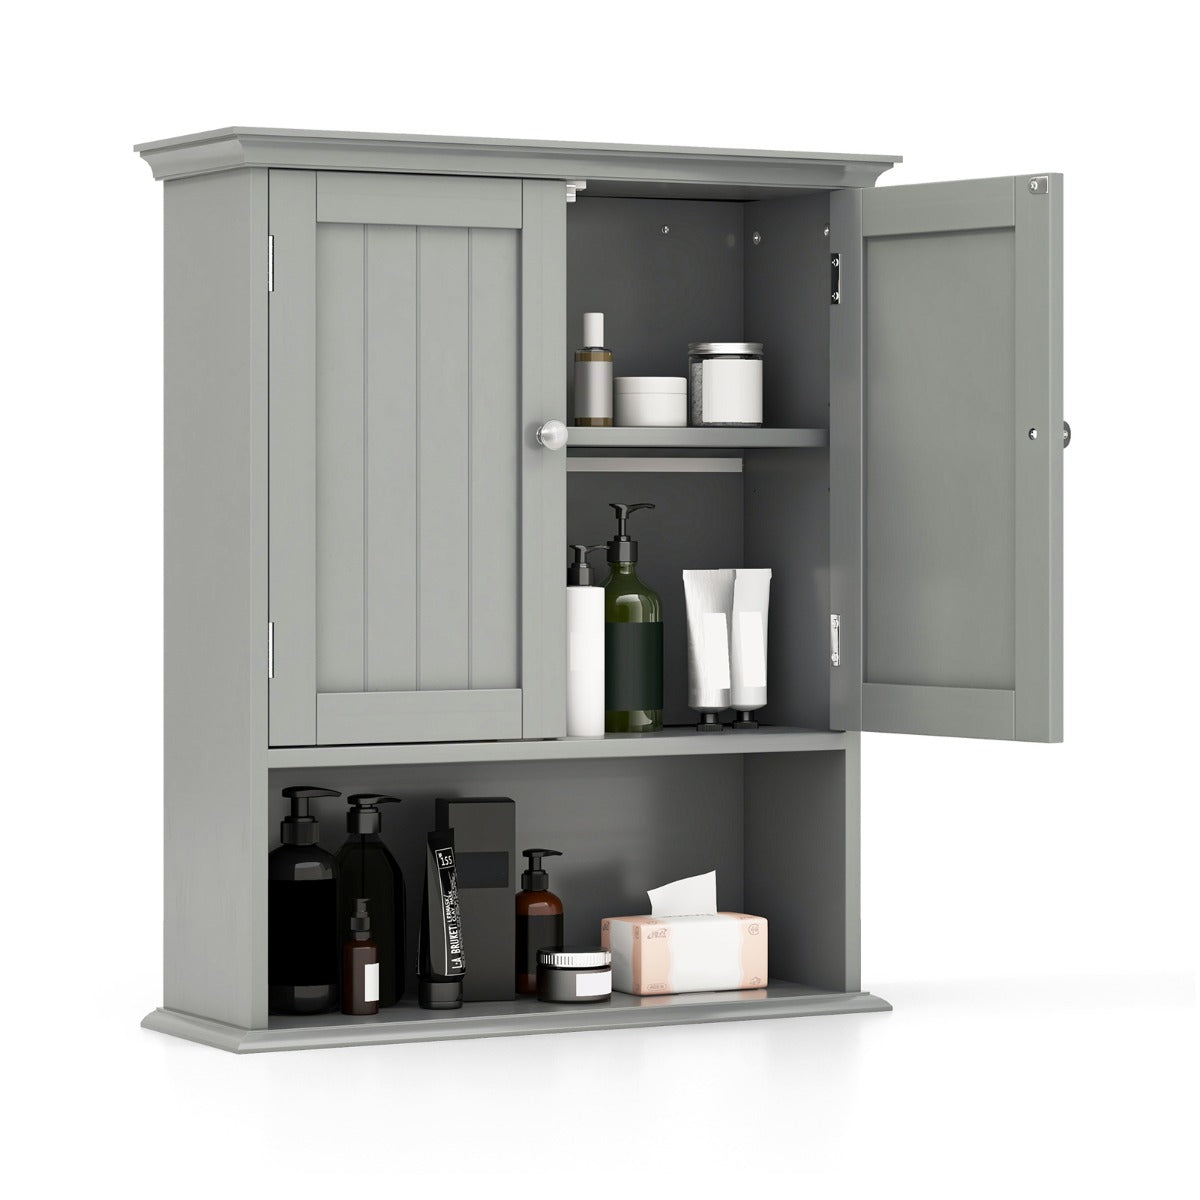 Wall Mount Bathroom Cabinet Storage Organizer with Doors and Shelves-Grey